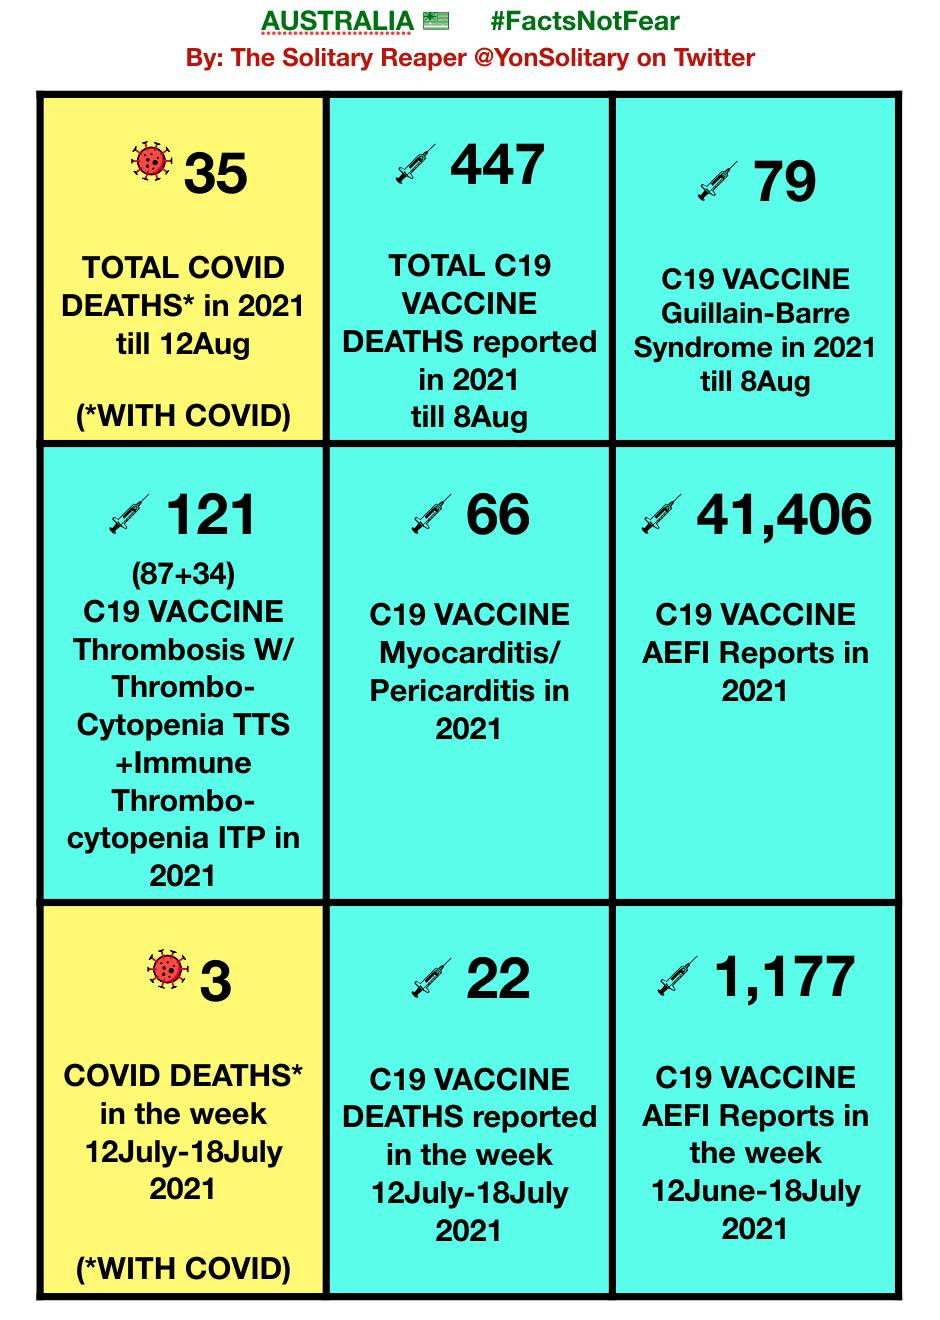 May be an image of text that says 'AUSTRALIA #FactsNotFear By: The Solitary Reaper @YonSolitary on Twitter 35 447 TOTAL COVID DEATHS* in 2021 till 12Aug 79 TOTAL C19 VACCINE DEATHS reported in 2021 till 8Aug (*WITH COVID) C19 VACCINE Guillain-Barre Guillain- Syndrome in 2021 till 8Aug 66 41,406 121 (87+34) C19 VACCINE Thrombosis W/ Thrombo- Cytopenia TTS +Immune Thrombo- cytopenia ITP in 2021 C19 VACCINE Myocarditis/ Pericarditis in 2021 C19 VACCINE AEFI Reports in 2021 3 22 COVID DEATHS* in the week 12July- 18July 2021 1,177 C19 VACCINE DEATHS reported in the week 12July-18July 2021 C19 VACCINE AEFI Reports in the week 12June-18July 2021 (*WITH COVID)'